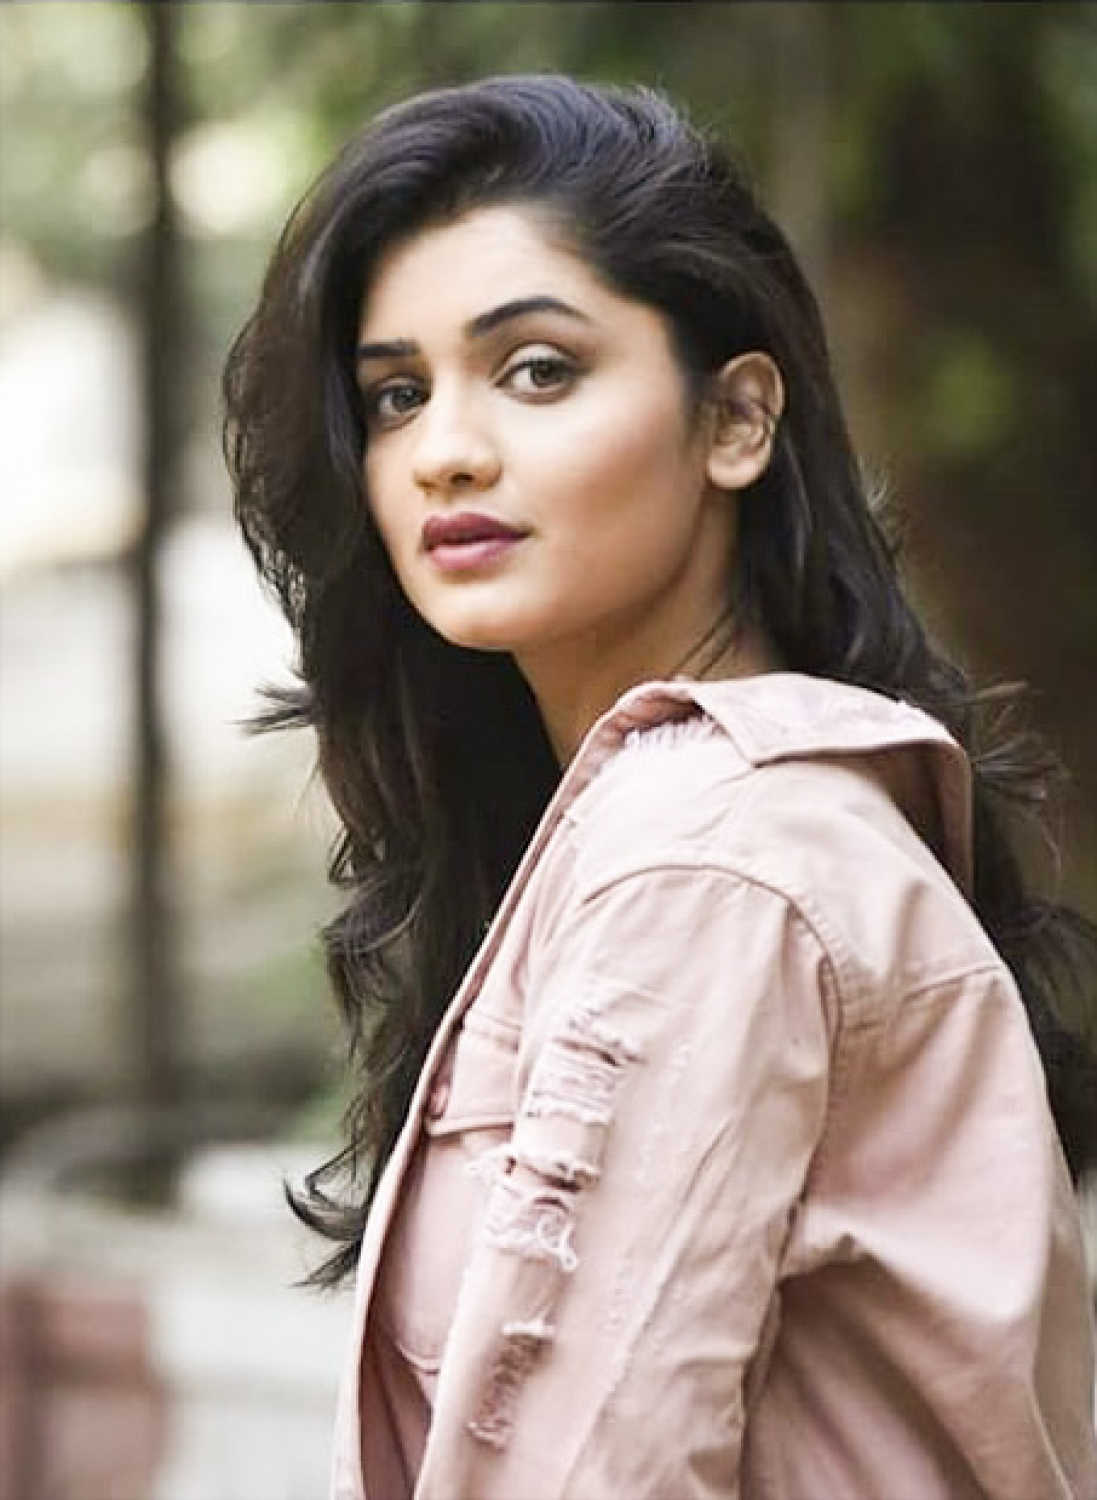 Hruta Durgule movies, filmography, biography and songs